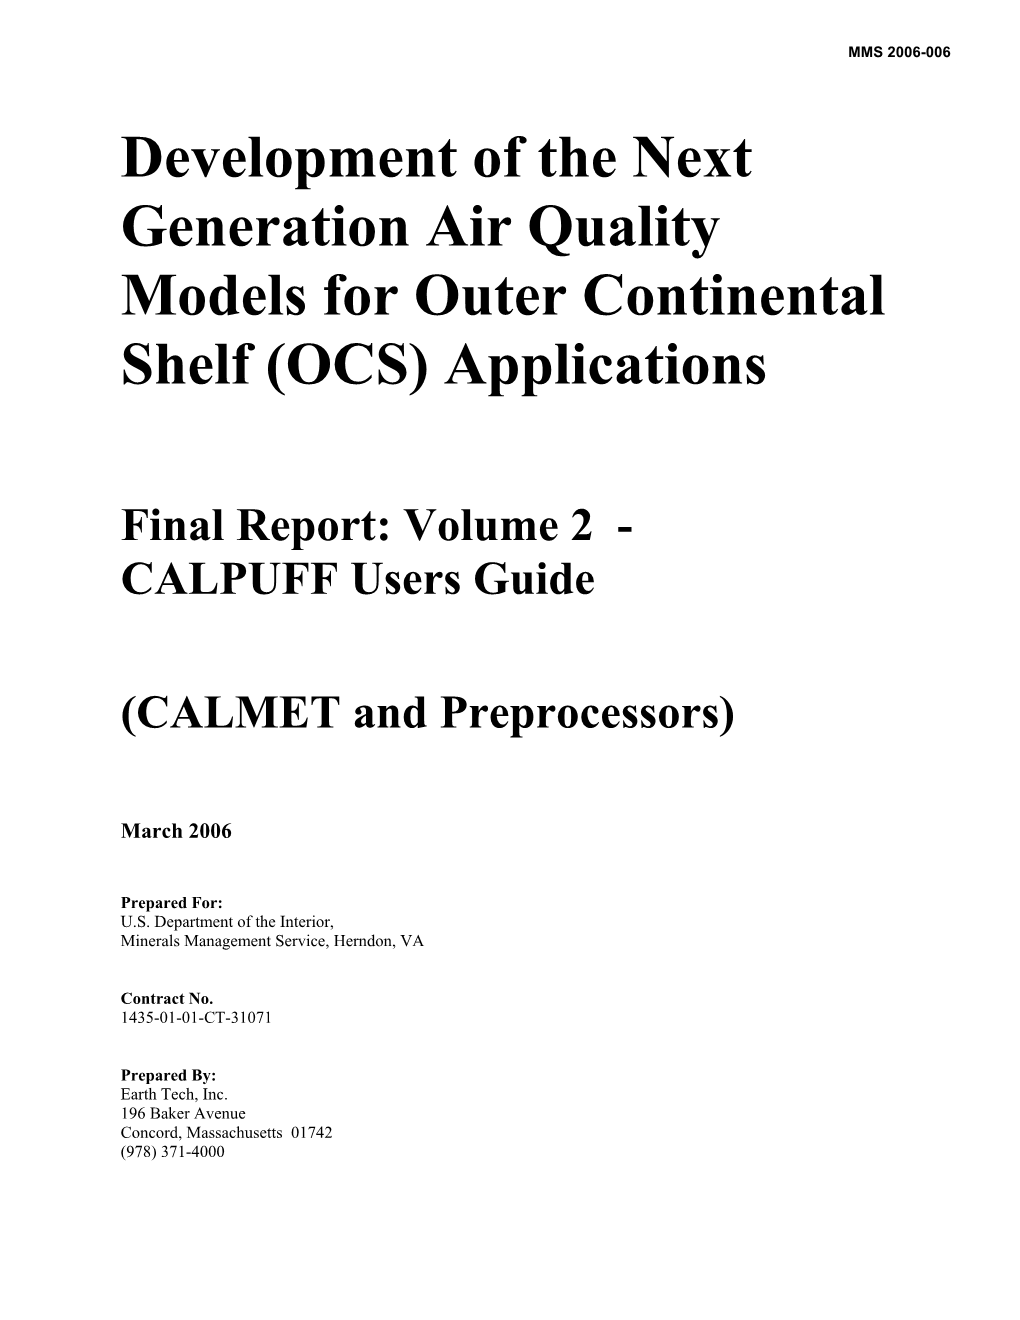 Development of the Next Generation Air Quality Models for Outer Continental Shelf (OCS) Applications